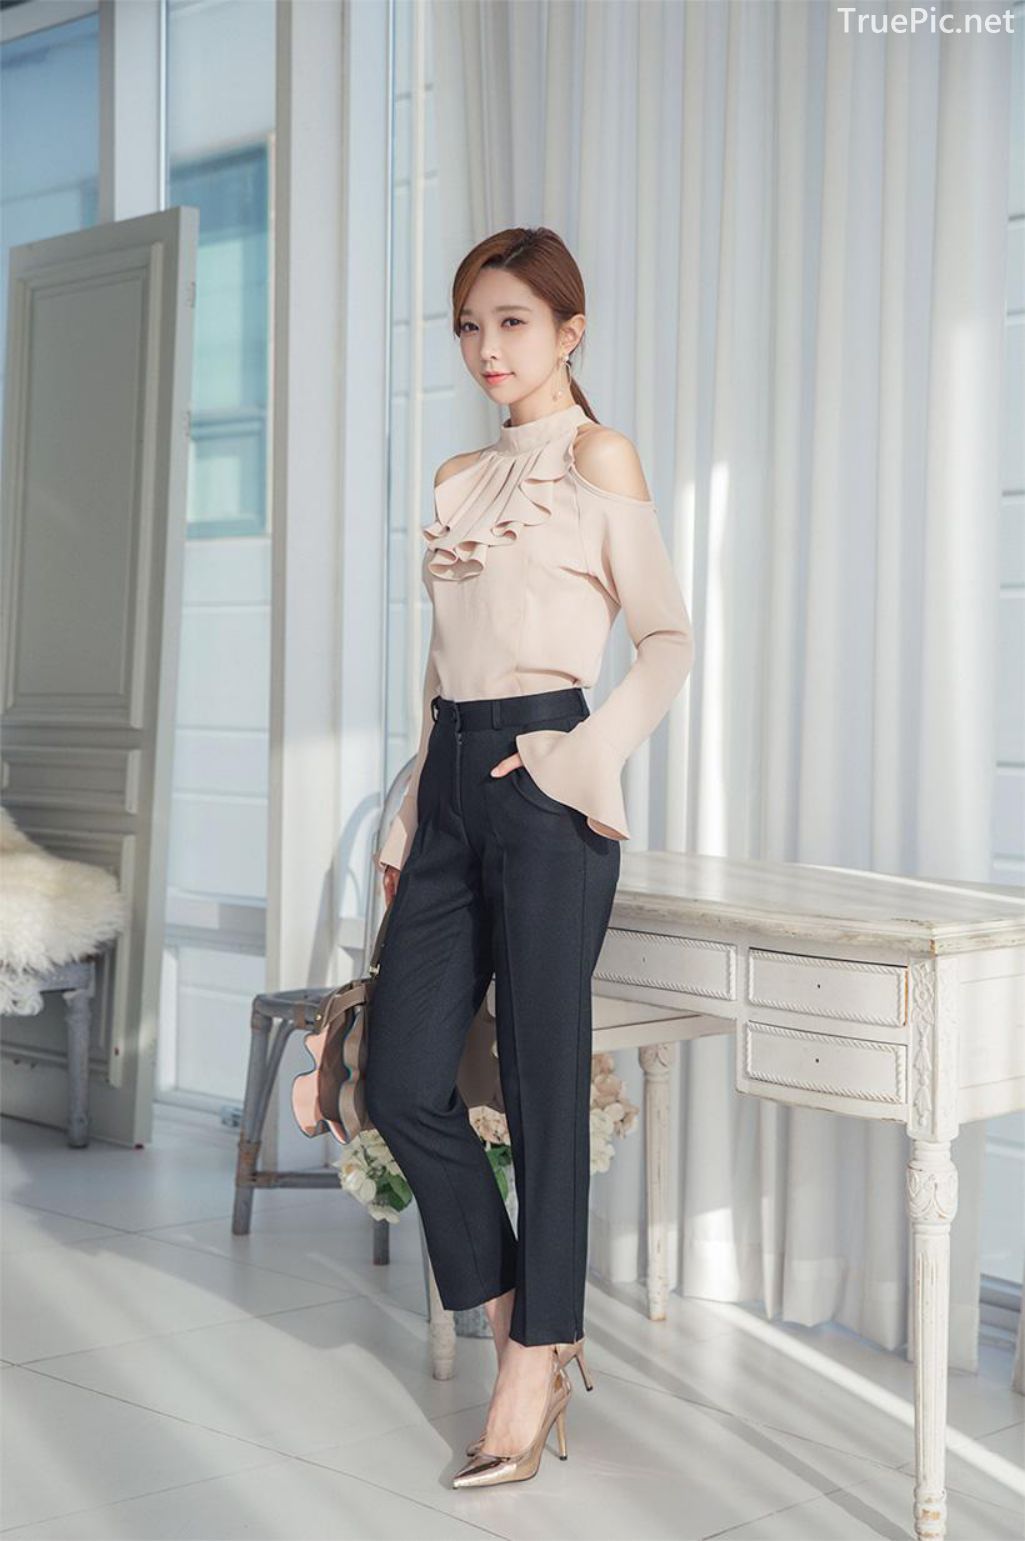 Korean-Hot-Fashion-Model-Park-Soo-Yeon-7-Outfit-sets-for-a-week-TruePic.net- Picture-13